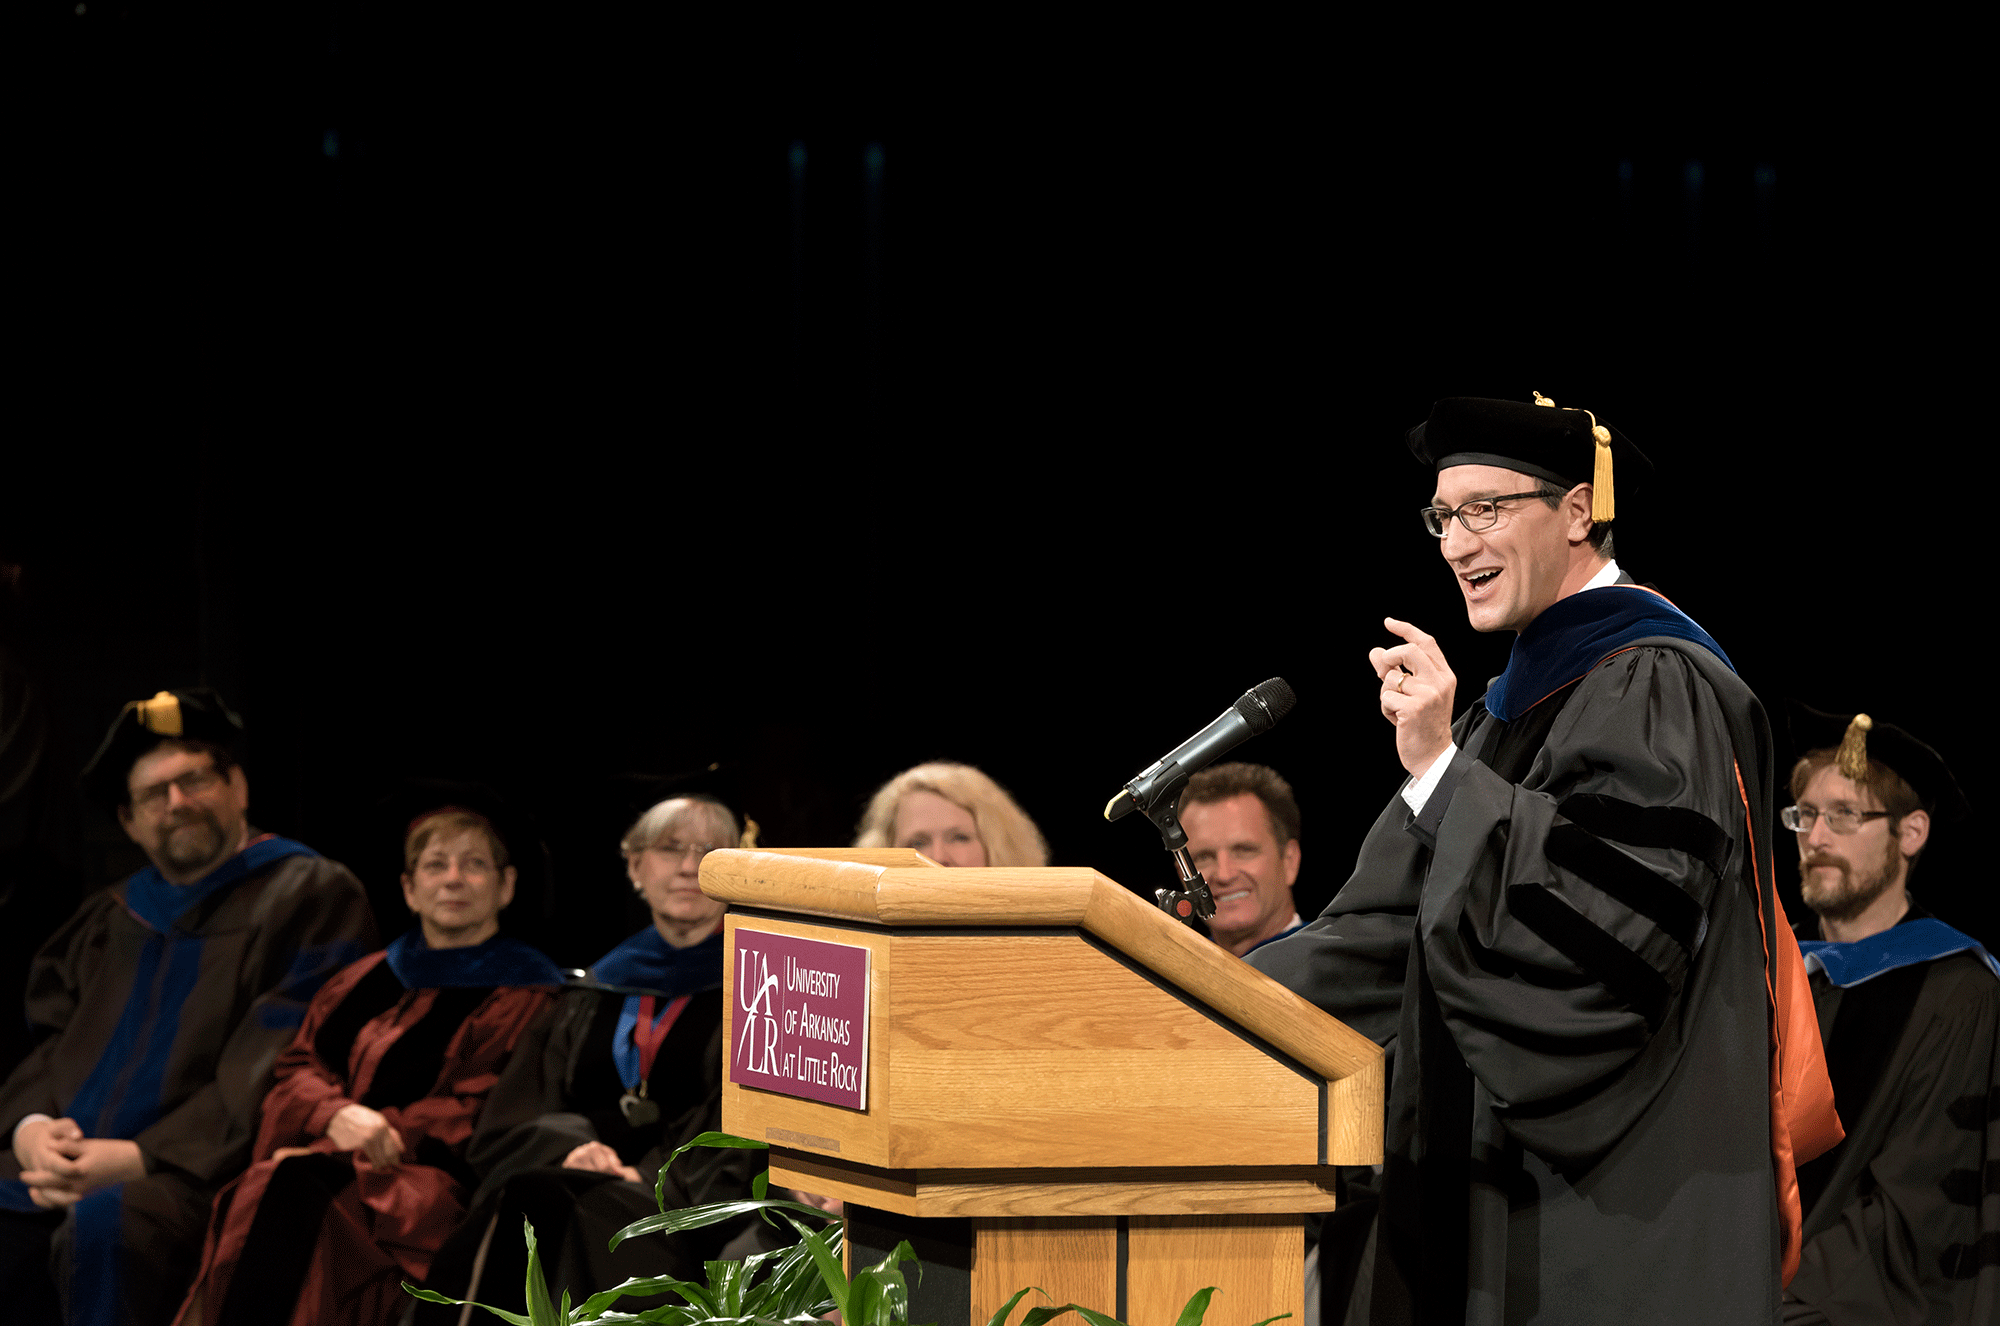 Dr. Julien Mirivel delivers the keynote address at the Aug. 16 Freshman Convocation at the University of Arkansas at Little Rock.